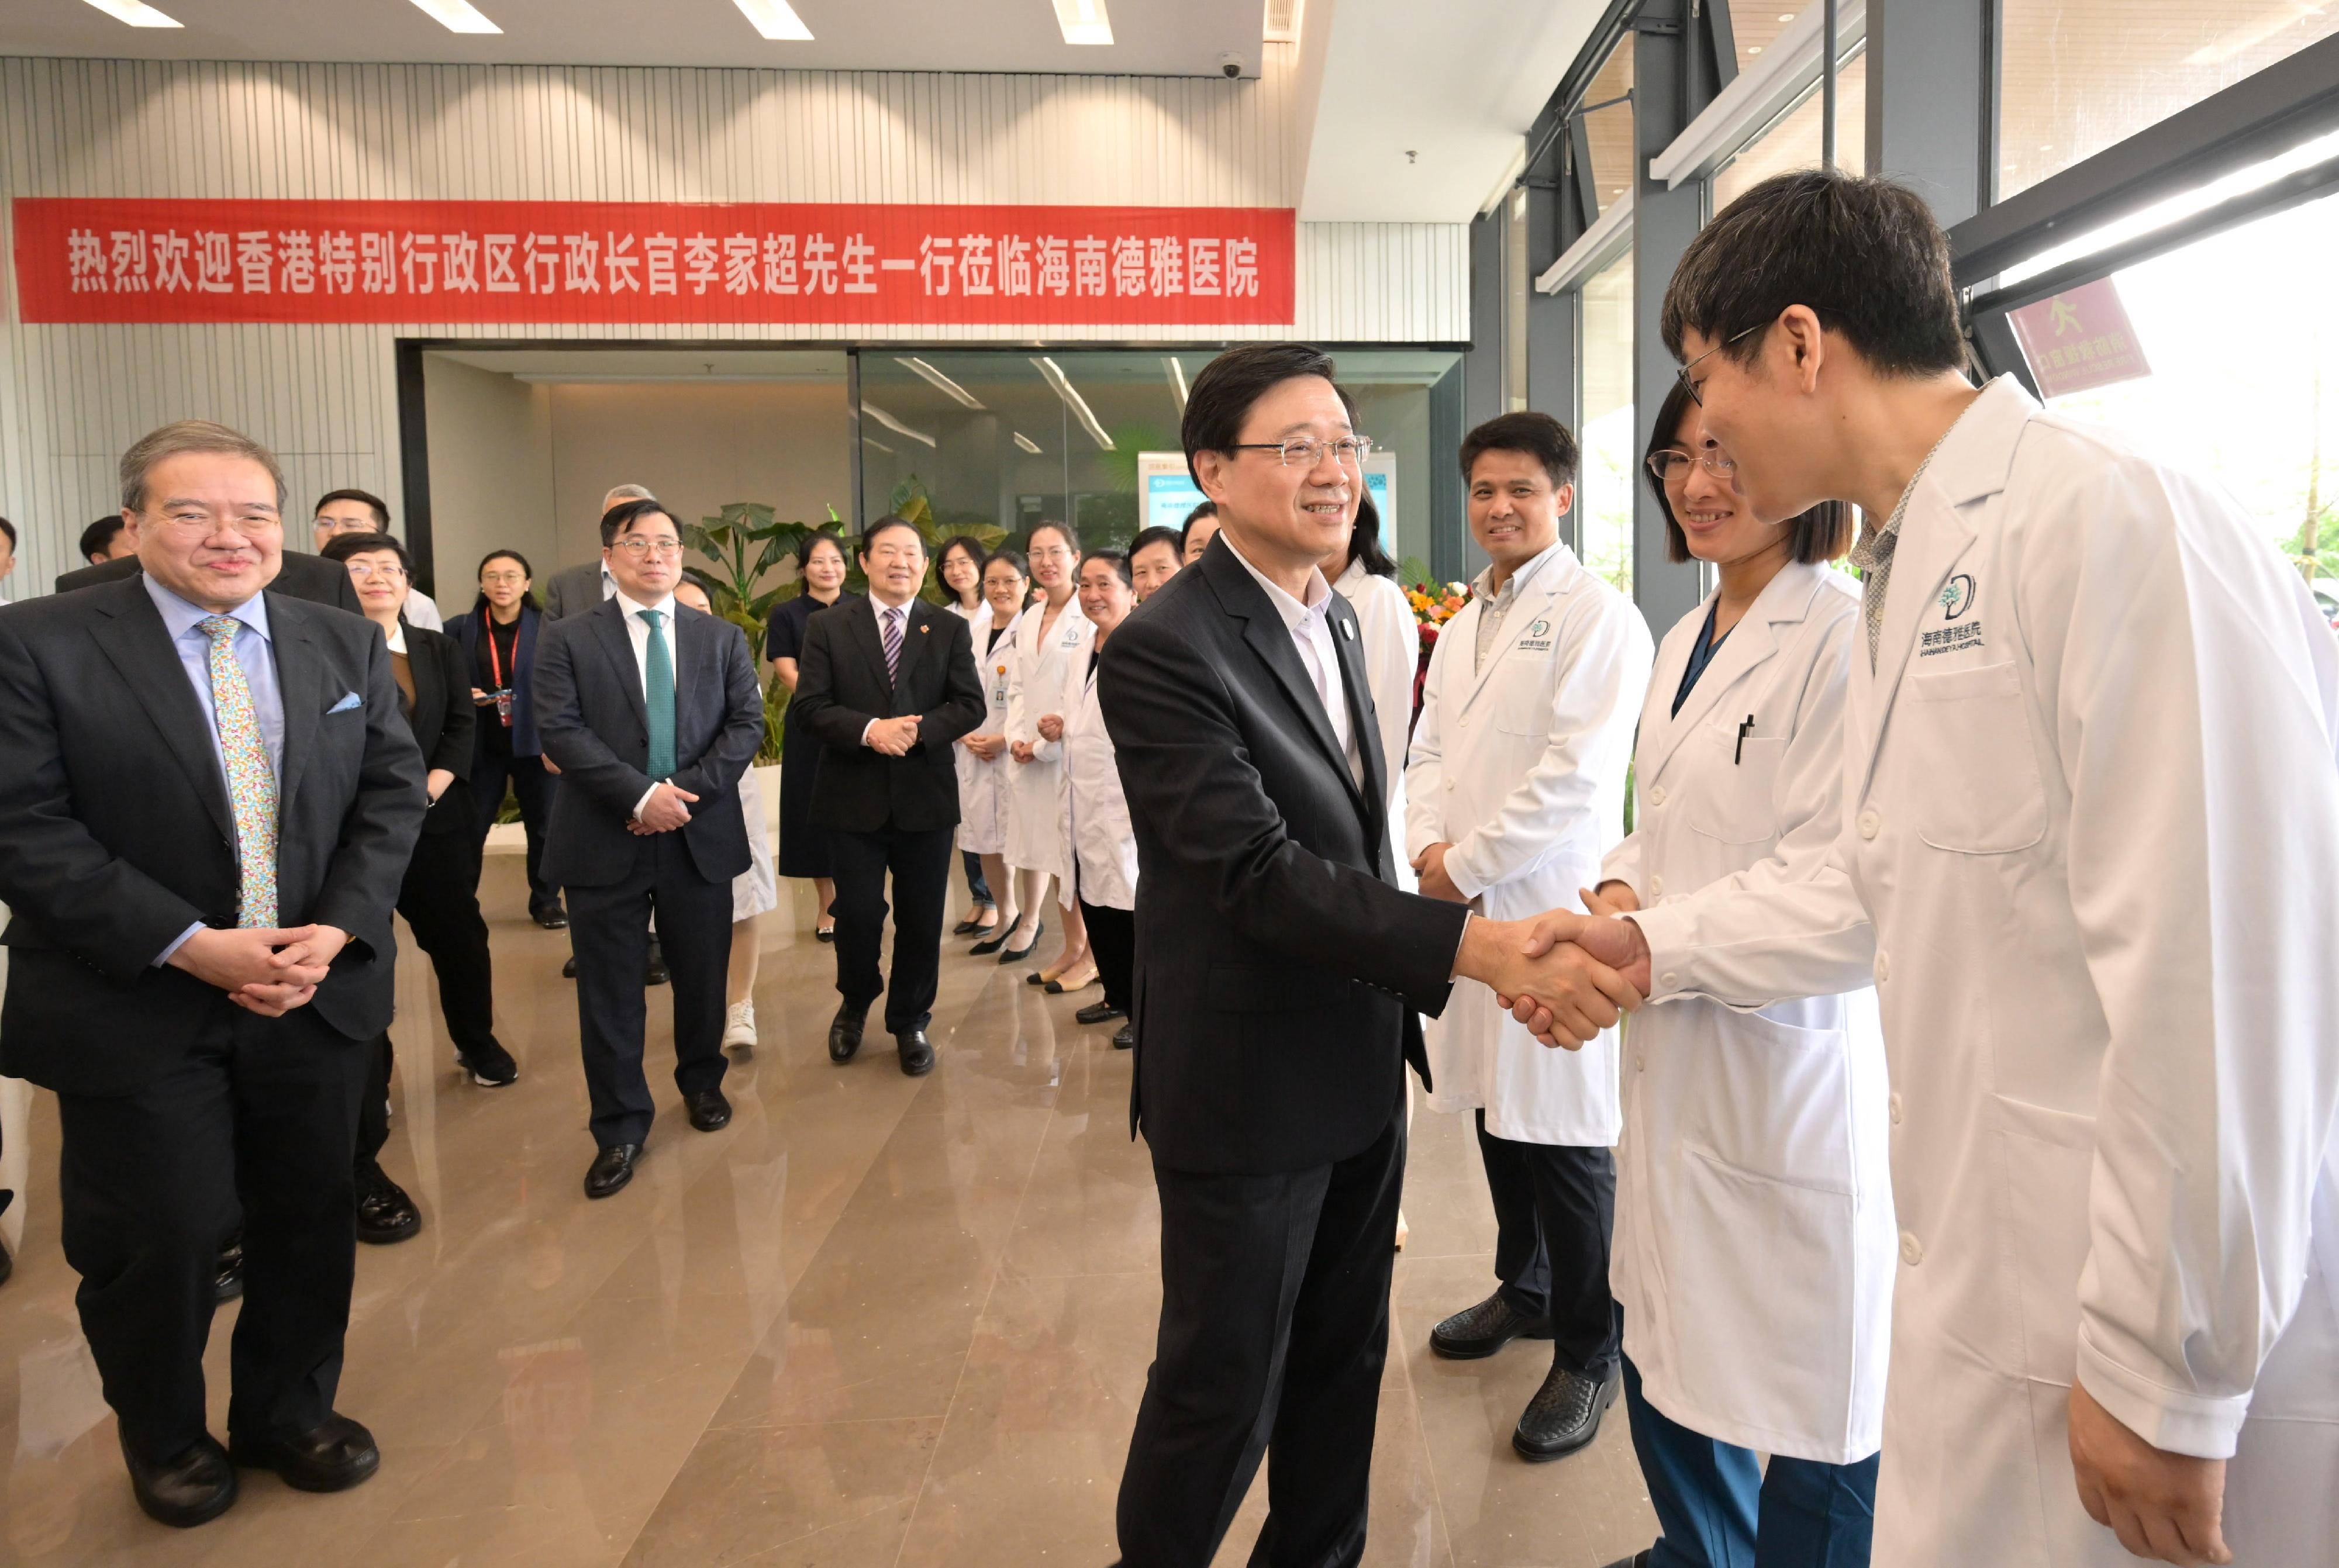 The Chief Executive, Mr John Lee, visited the Boao Lecheng International Medical Tourism Pilot Zone in Hainan today (March 29). Photo shows Mr Lee (third right) shaking hands with hospital staff. 
